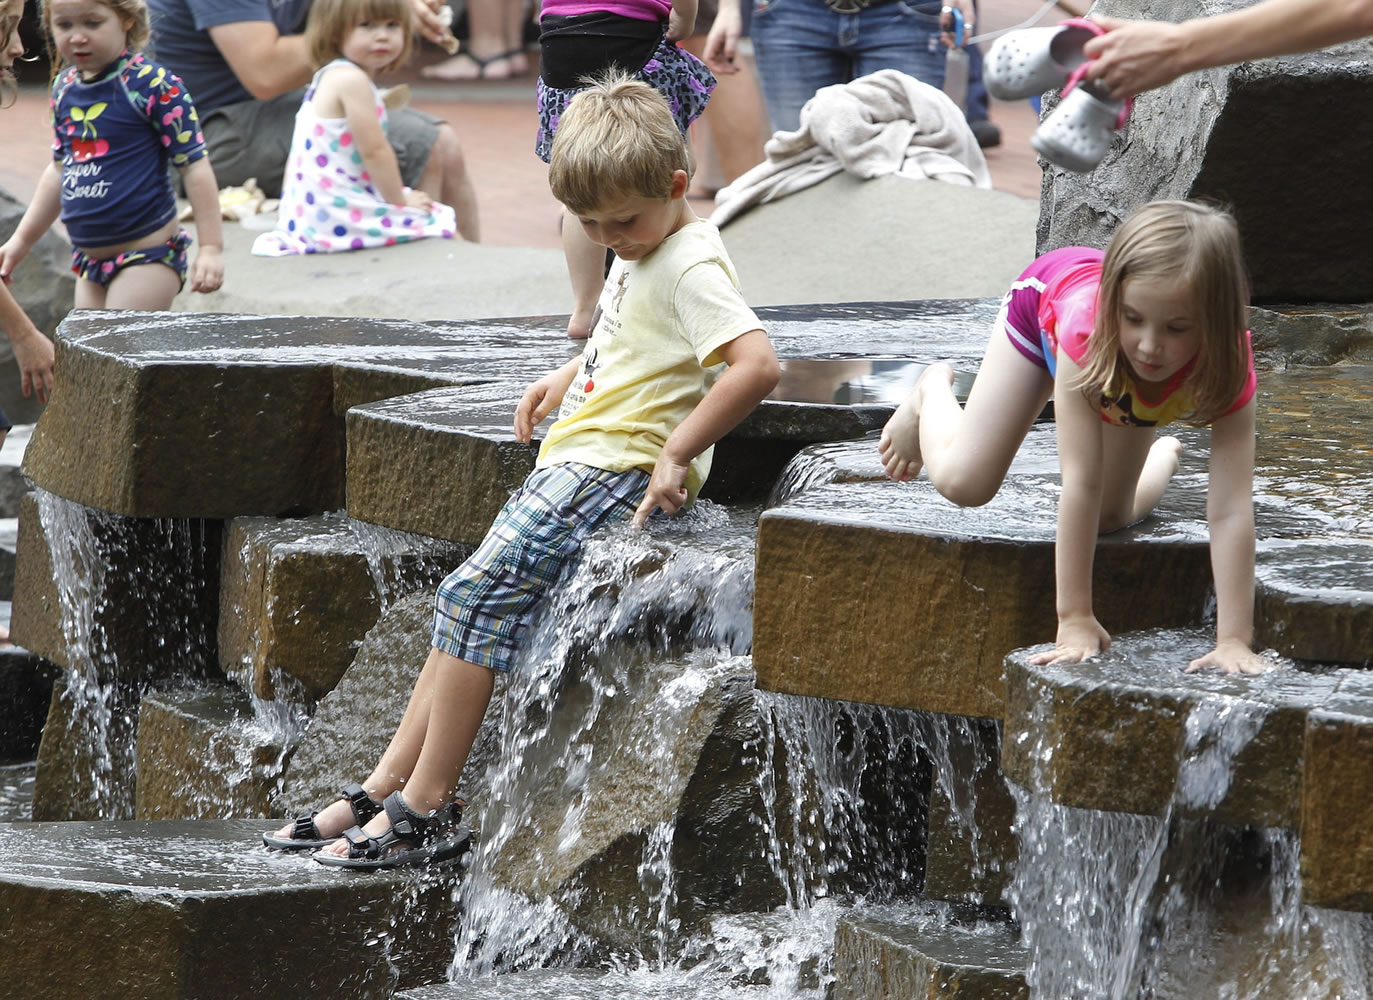 Children take advantage of a warm, muggy Saturday afternoon to enjoy the water feature at Vancouver's Esther Short Park.